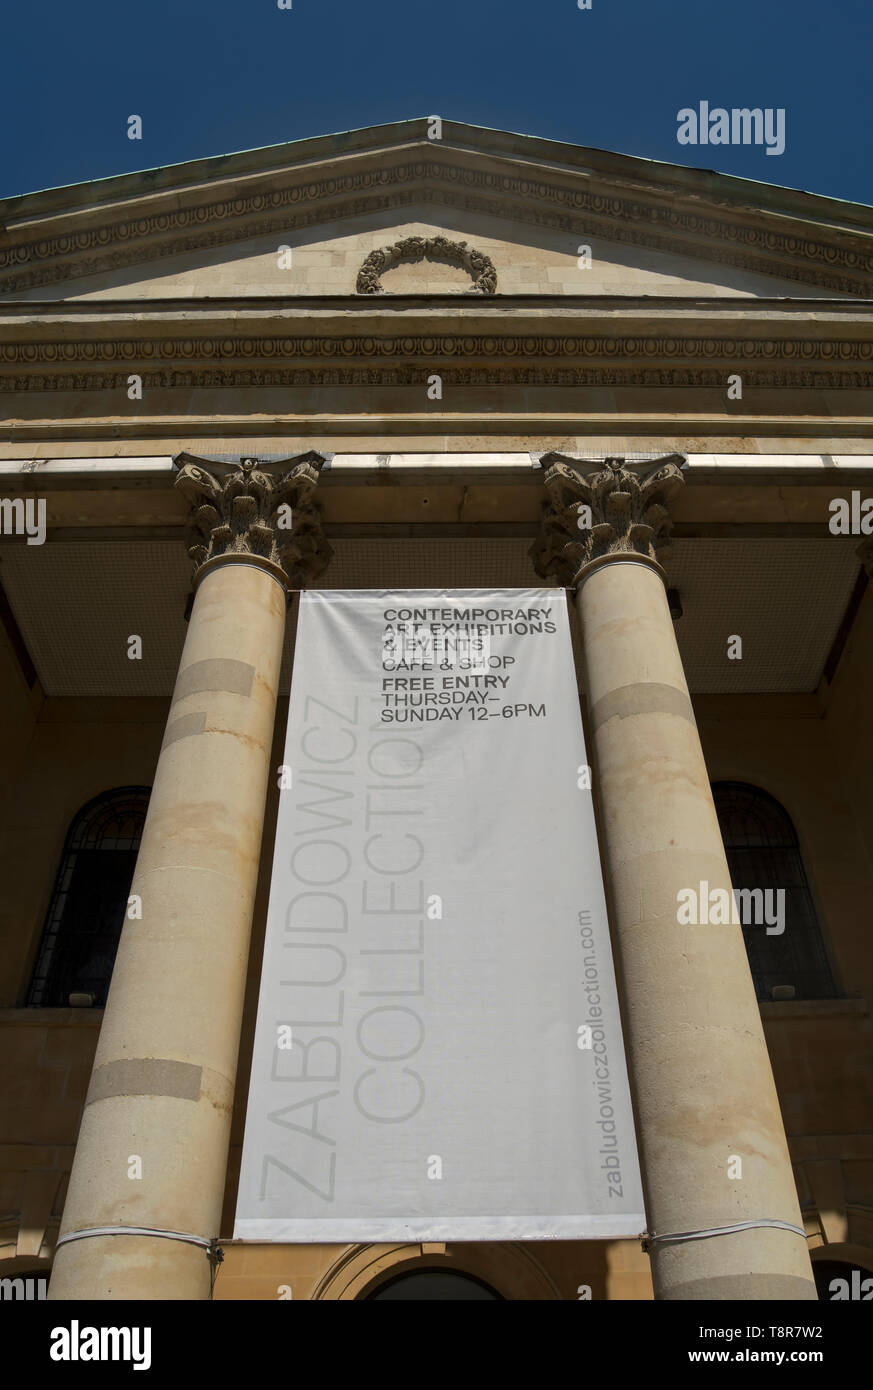 hanging banner at the entrance to the zabludowicz collection, an art exhibition space in a former methodist chapel, camden, london, england Stock Photo